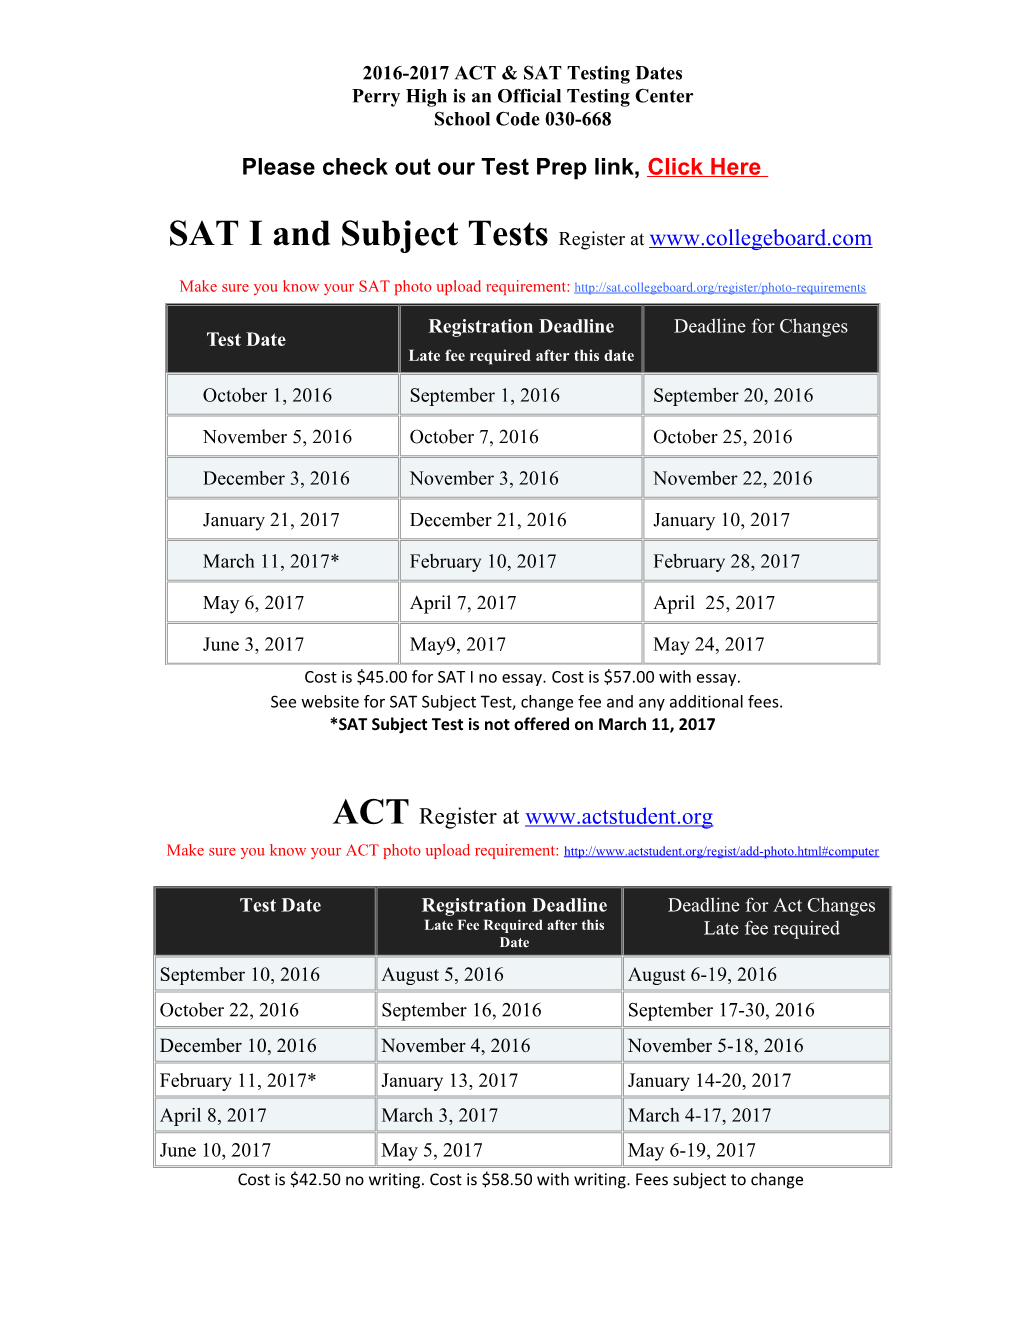 2016-2017 ACT & SAT Testing Dates Perry High Is an Official Testing Center School Code